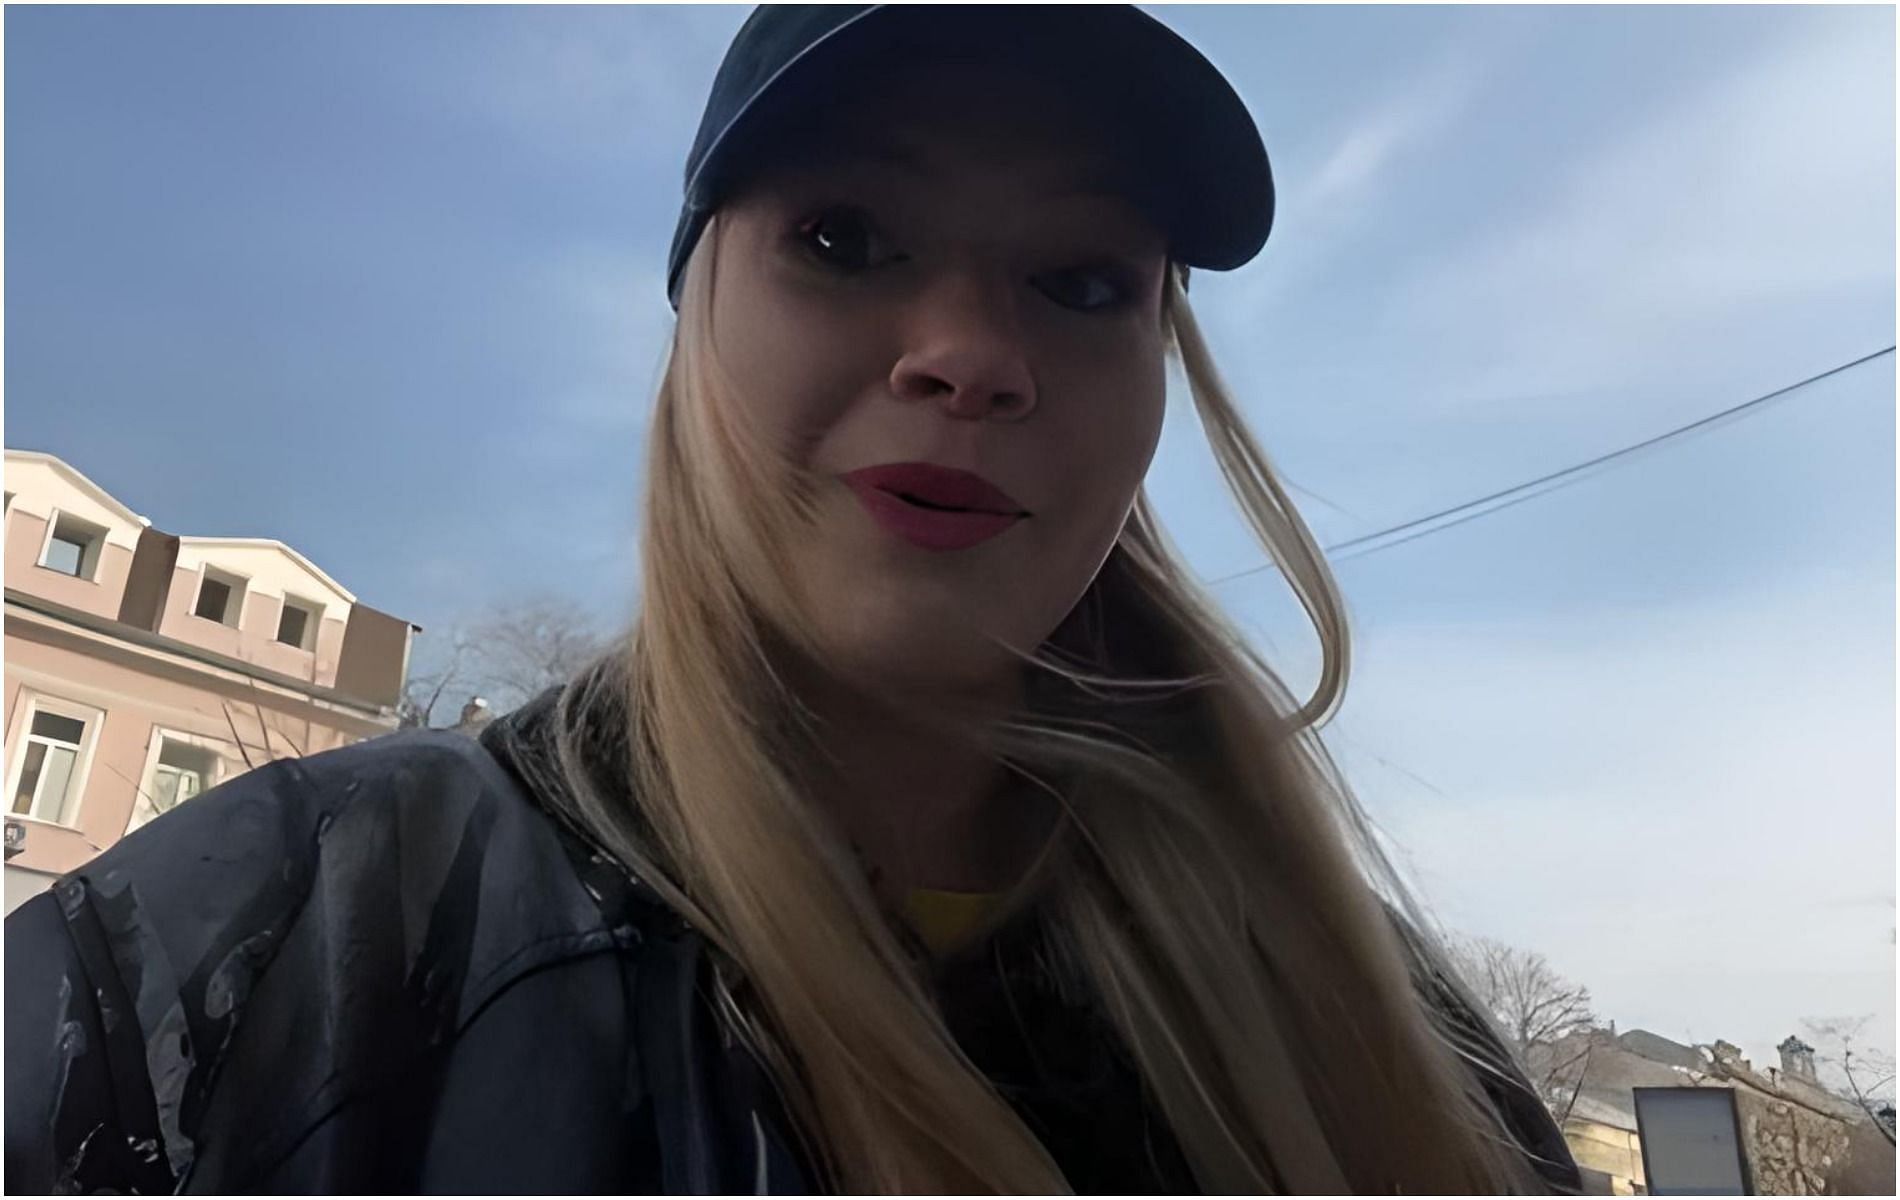 As Russia invades Ukraine, livestreamers are documenting the attacks through livestreams (Image via Twitch/Katymentooll)